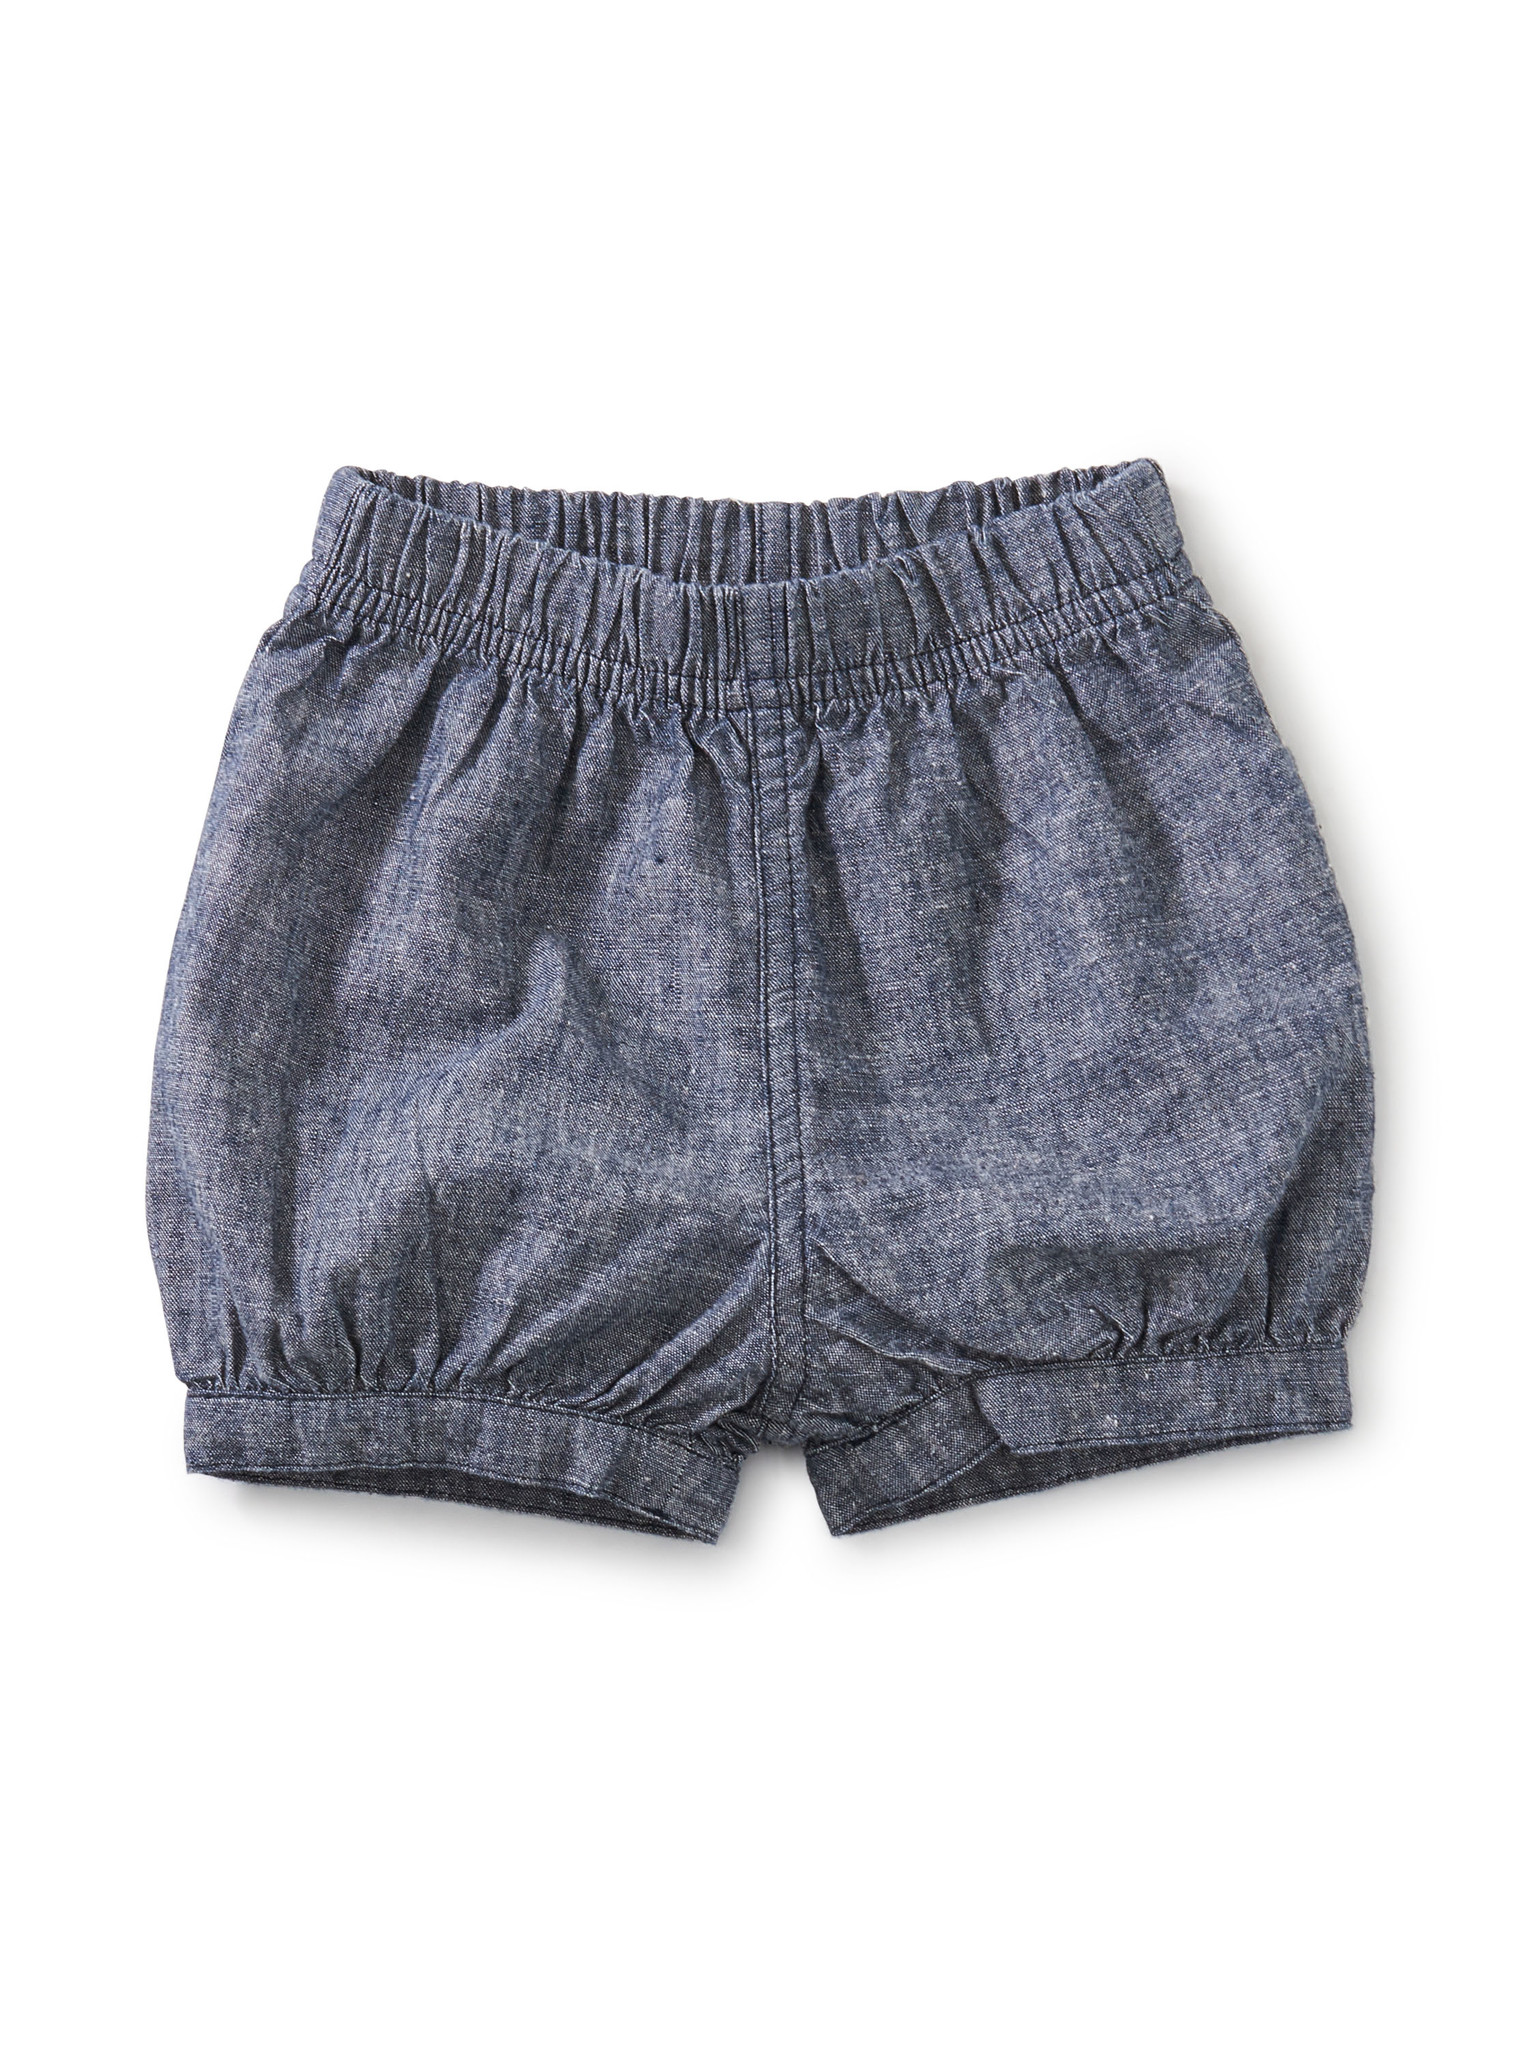 Tea Collection Chambray Bubble Baby Shorts